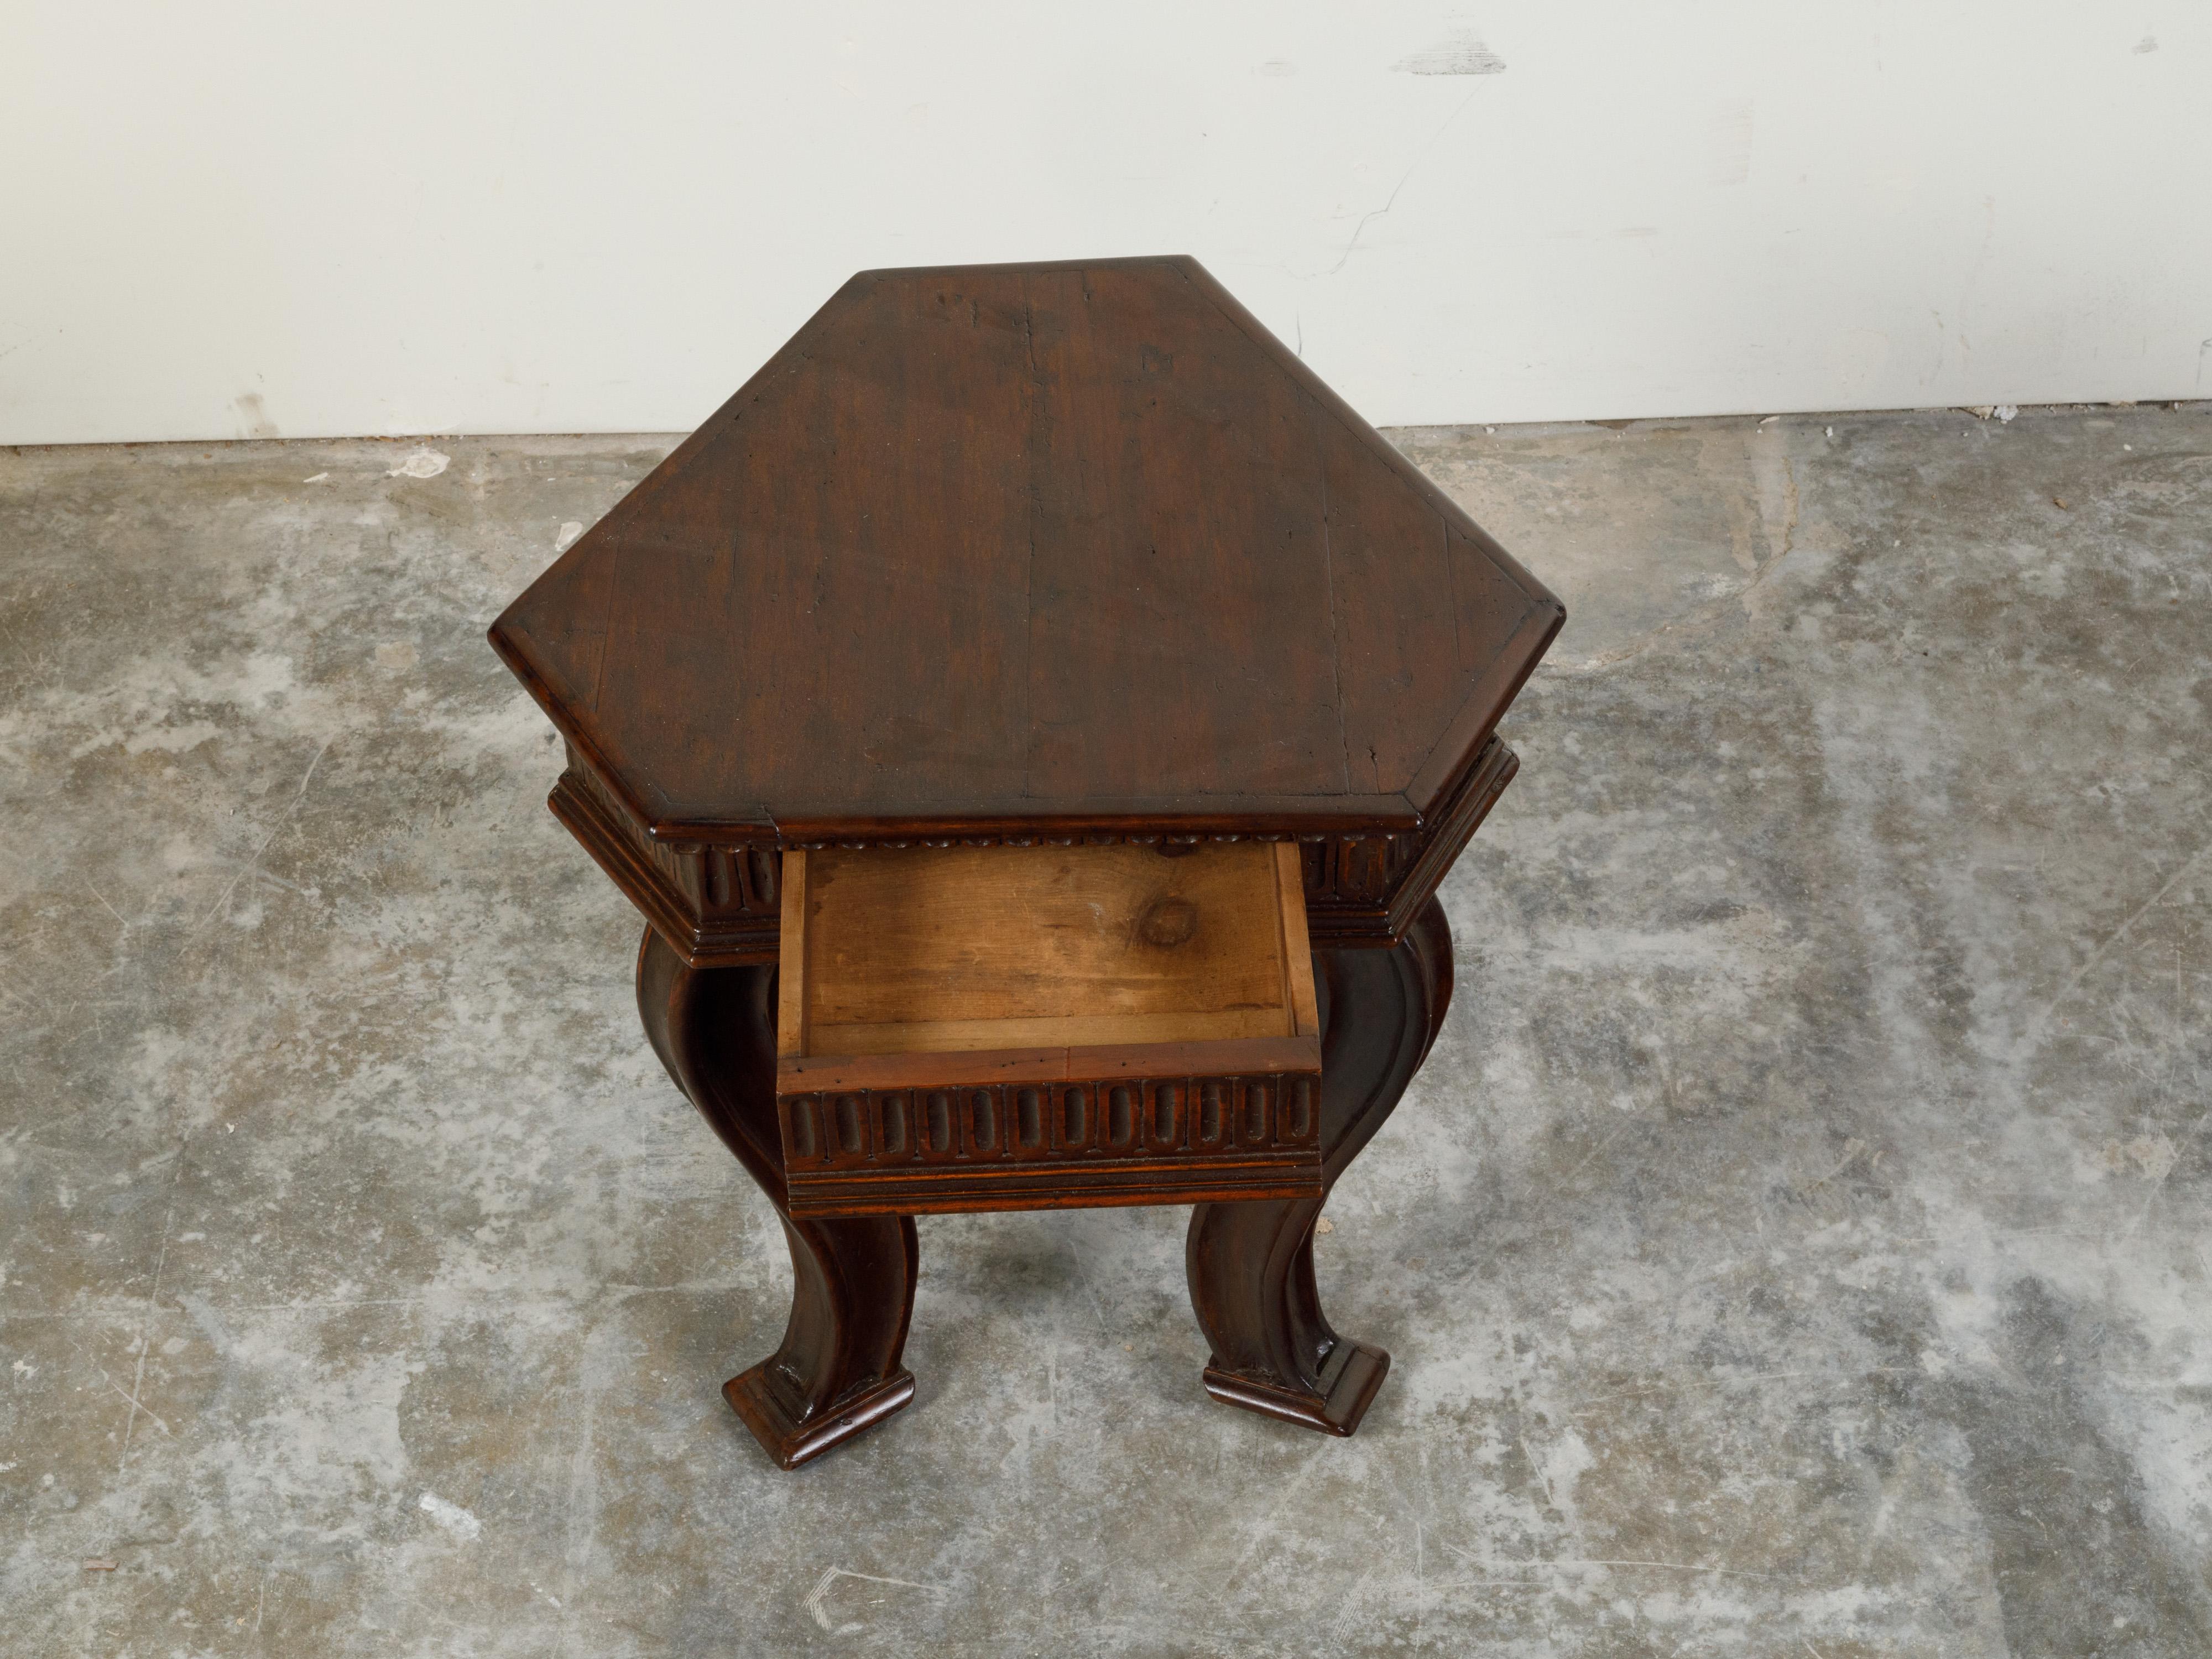 Carved Italian Walnut Late 18th Century Low Side table with Hexagonal Top and Volutes